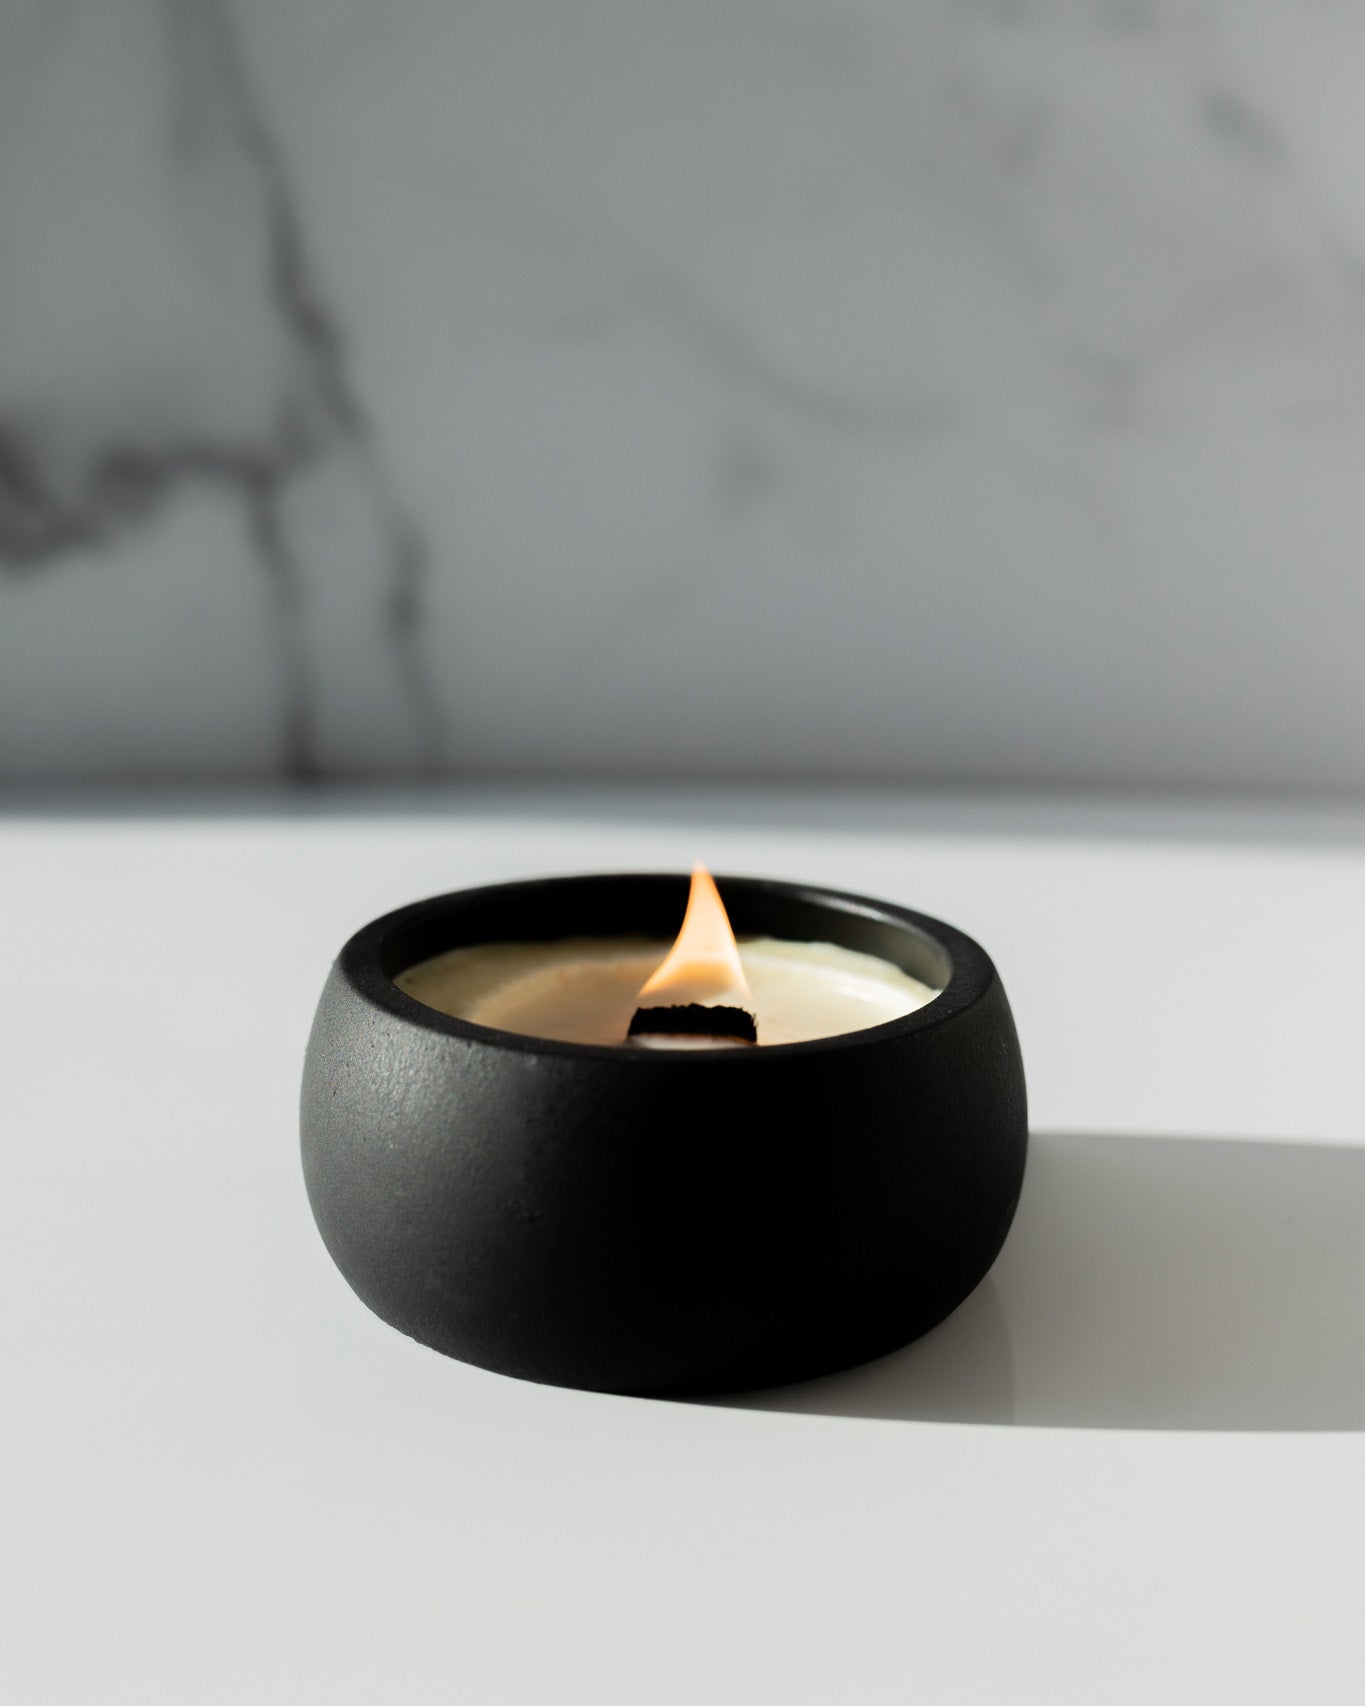 But First Sleep Coconut Soy Candle - Black Concrete Wooden Wick Vessel